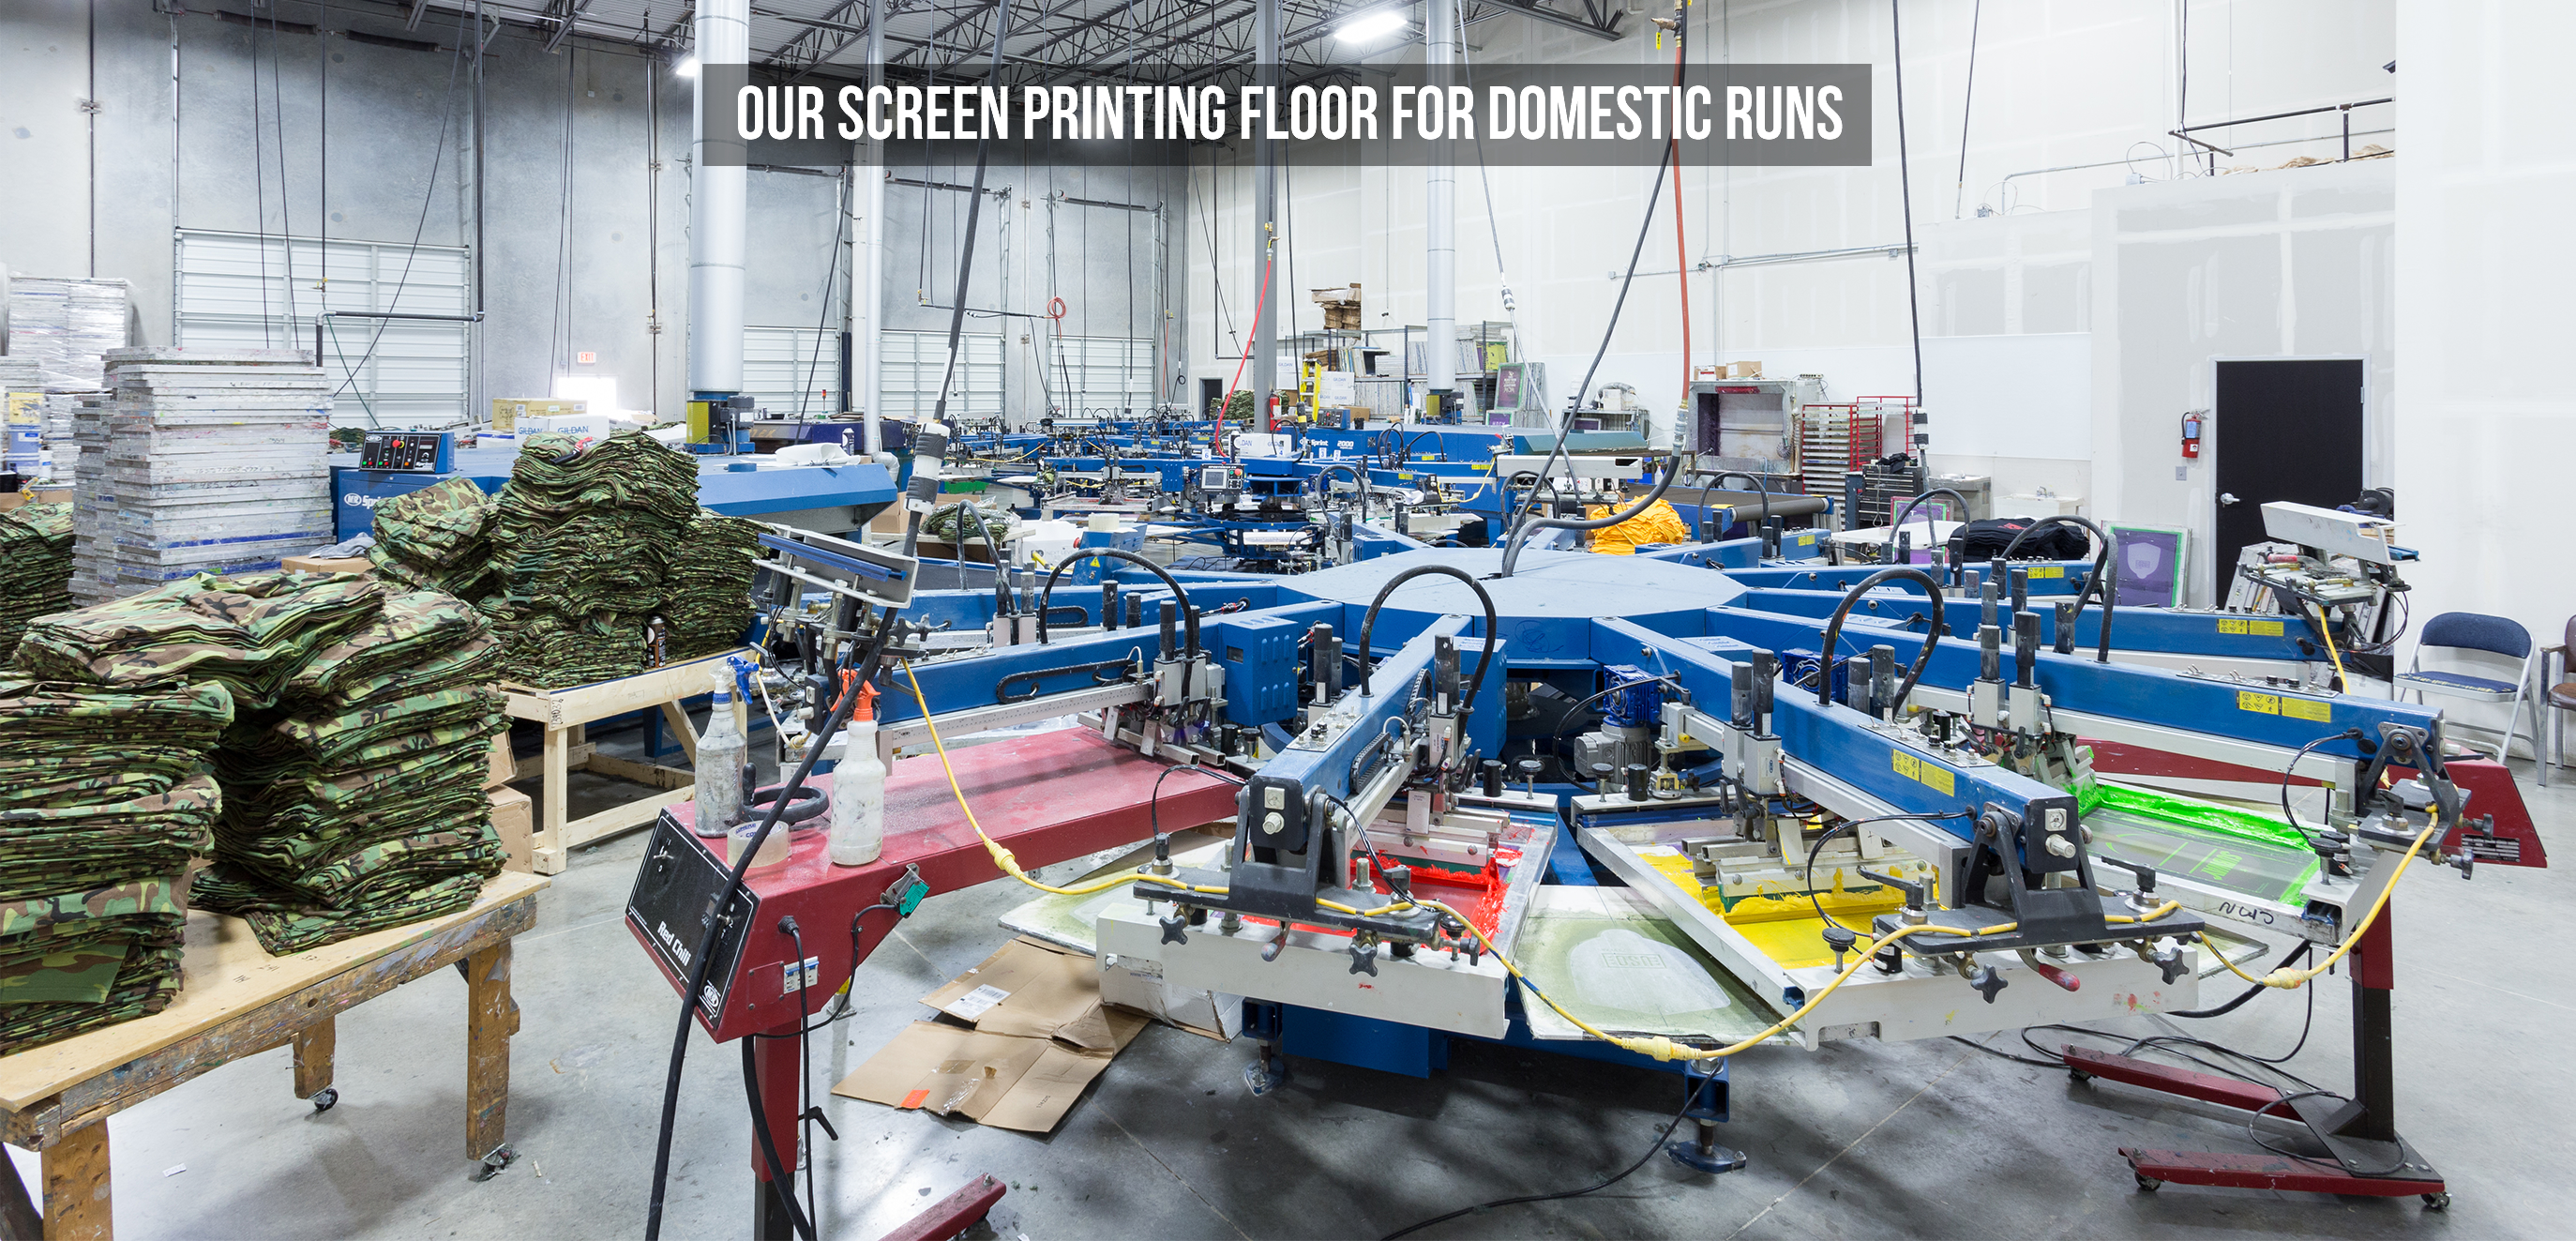 OUR SCREEN PRINTING FLOOR FOR DOMESTIC RUNS